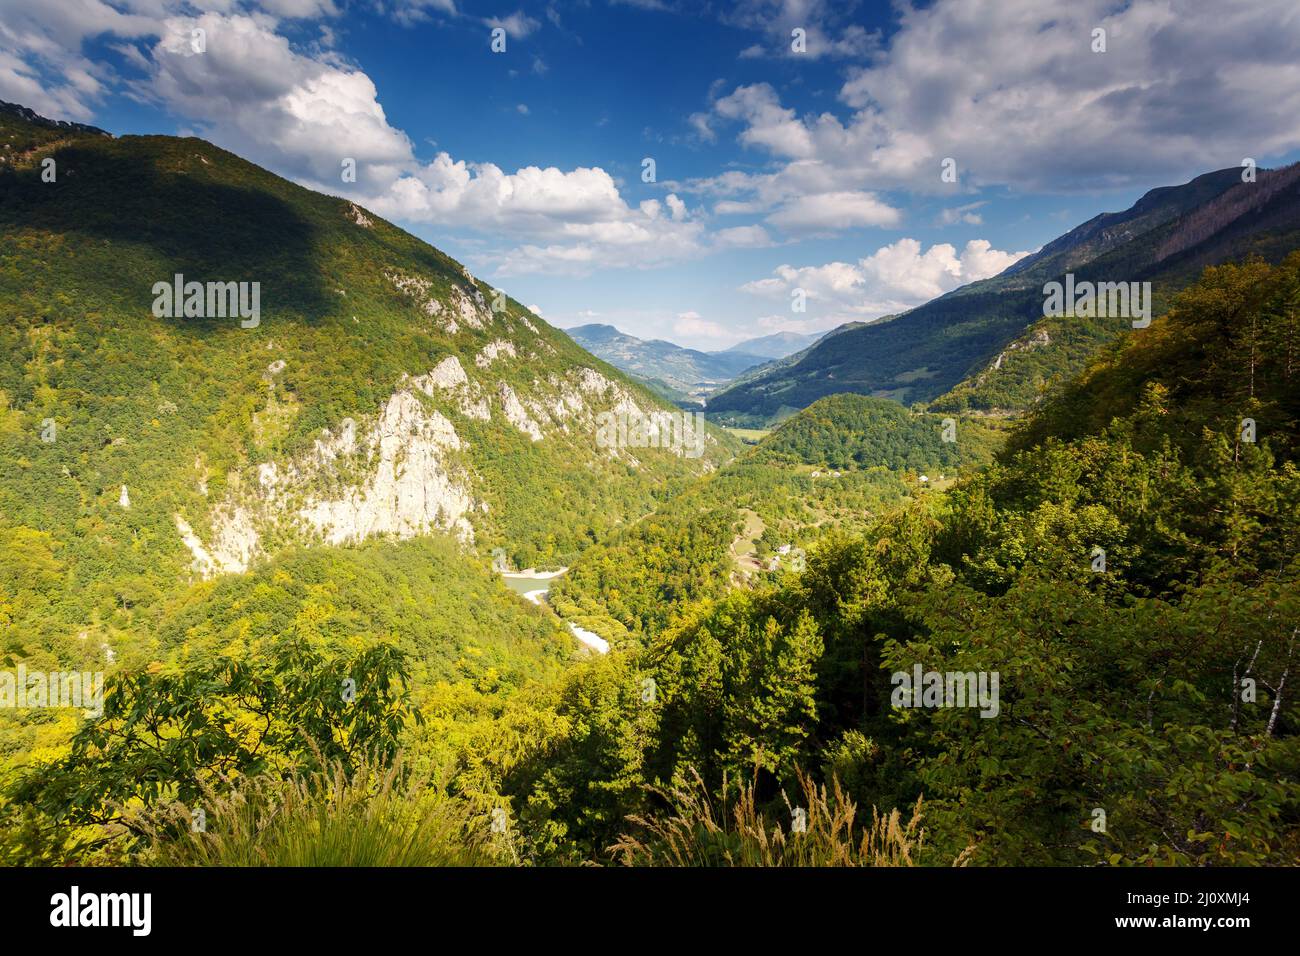 Fantastic view Tara river gorge - is the second biggest canyon in the world and the biggest one in Europe in the national park Durmitor in Montenegro. Stock Photo